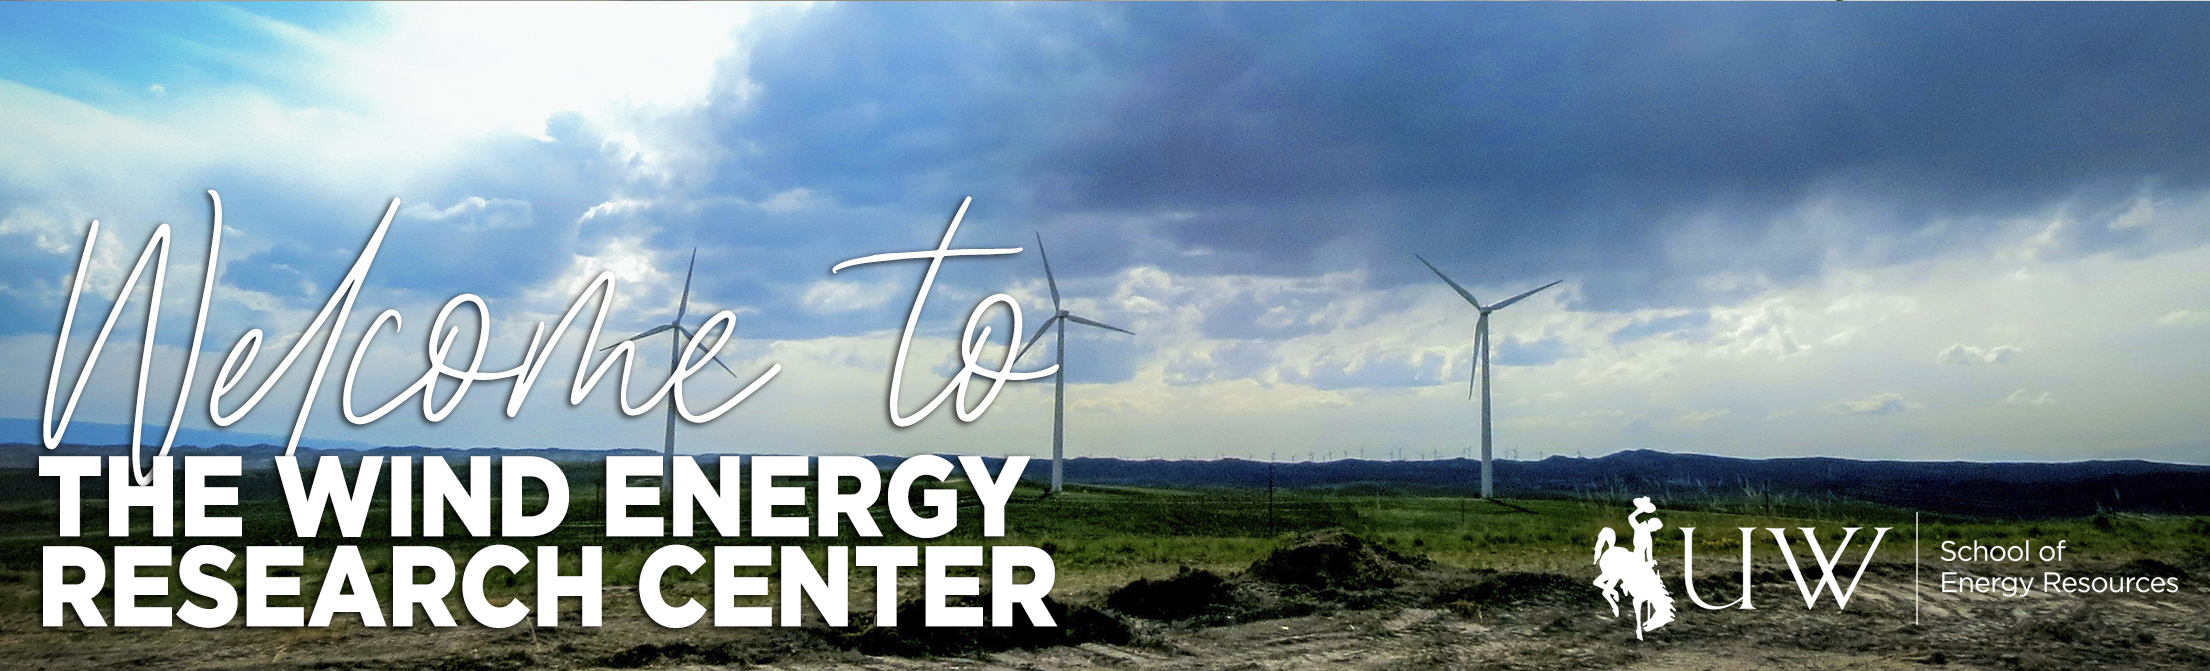 wind energy research center